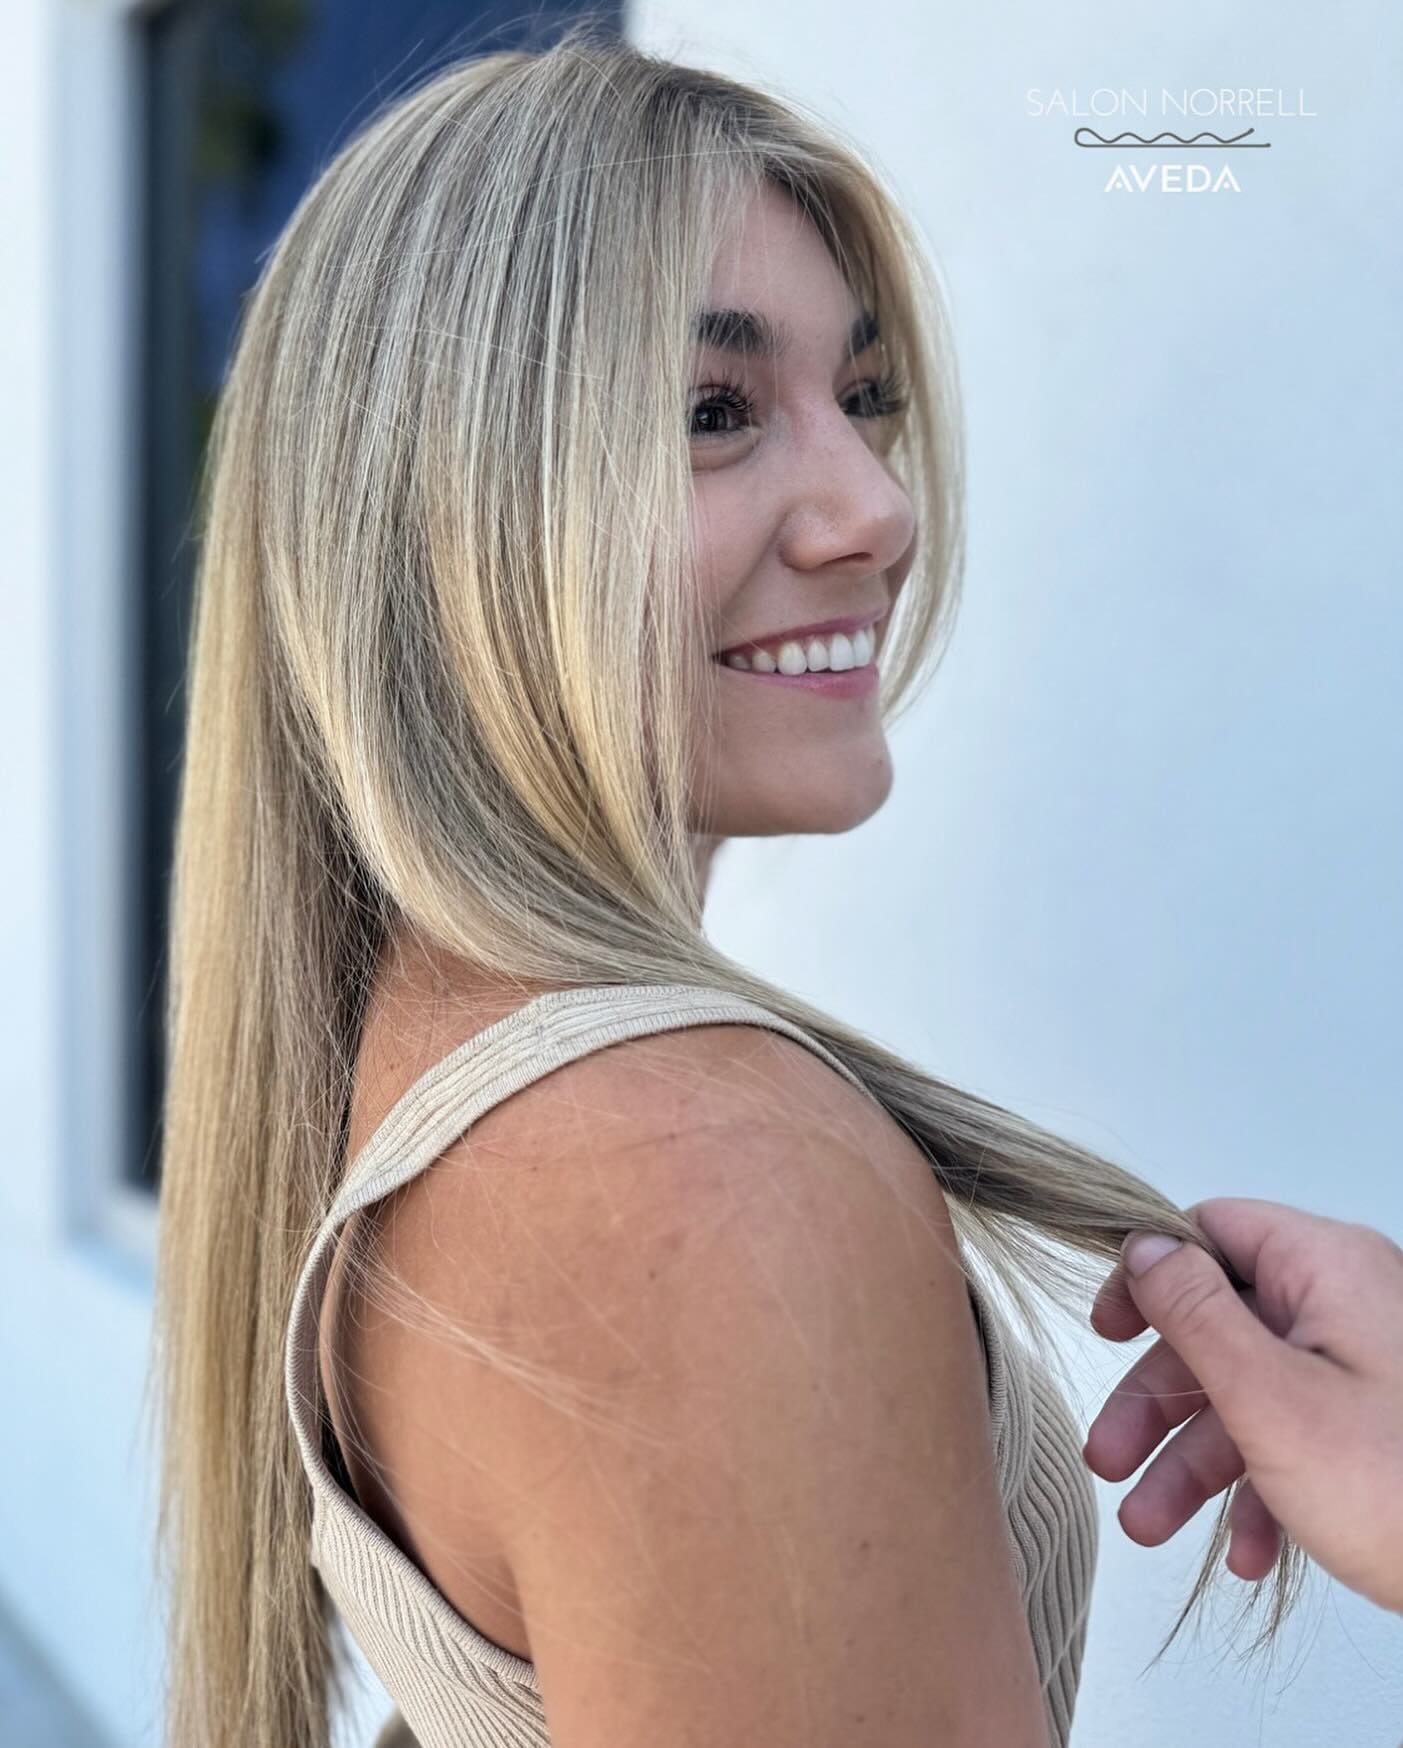 Hair | shannon 
Make your reservation today! 
🗓Reservations are best 
📲Text 813-590-6765 
☎️Call 813-265-2000 
🔗 Link in bio to book online 
💻TampaAveda.com 
📍Tampa, Florida 
🏷 tag us #salonnorrell